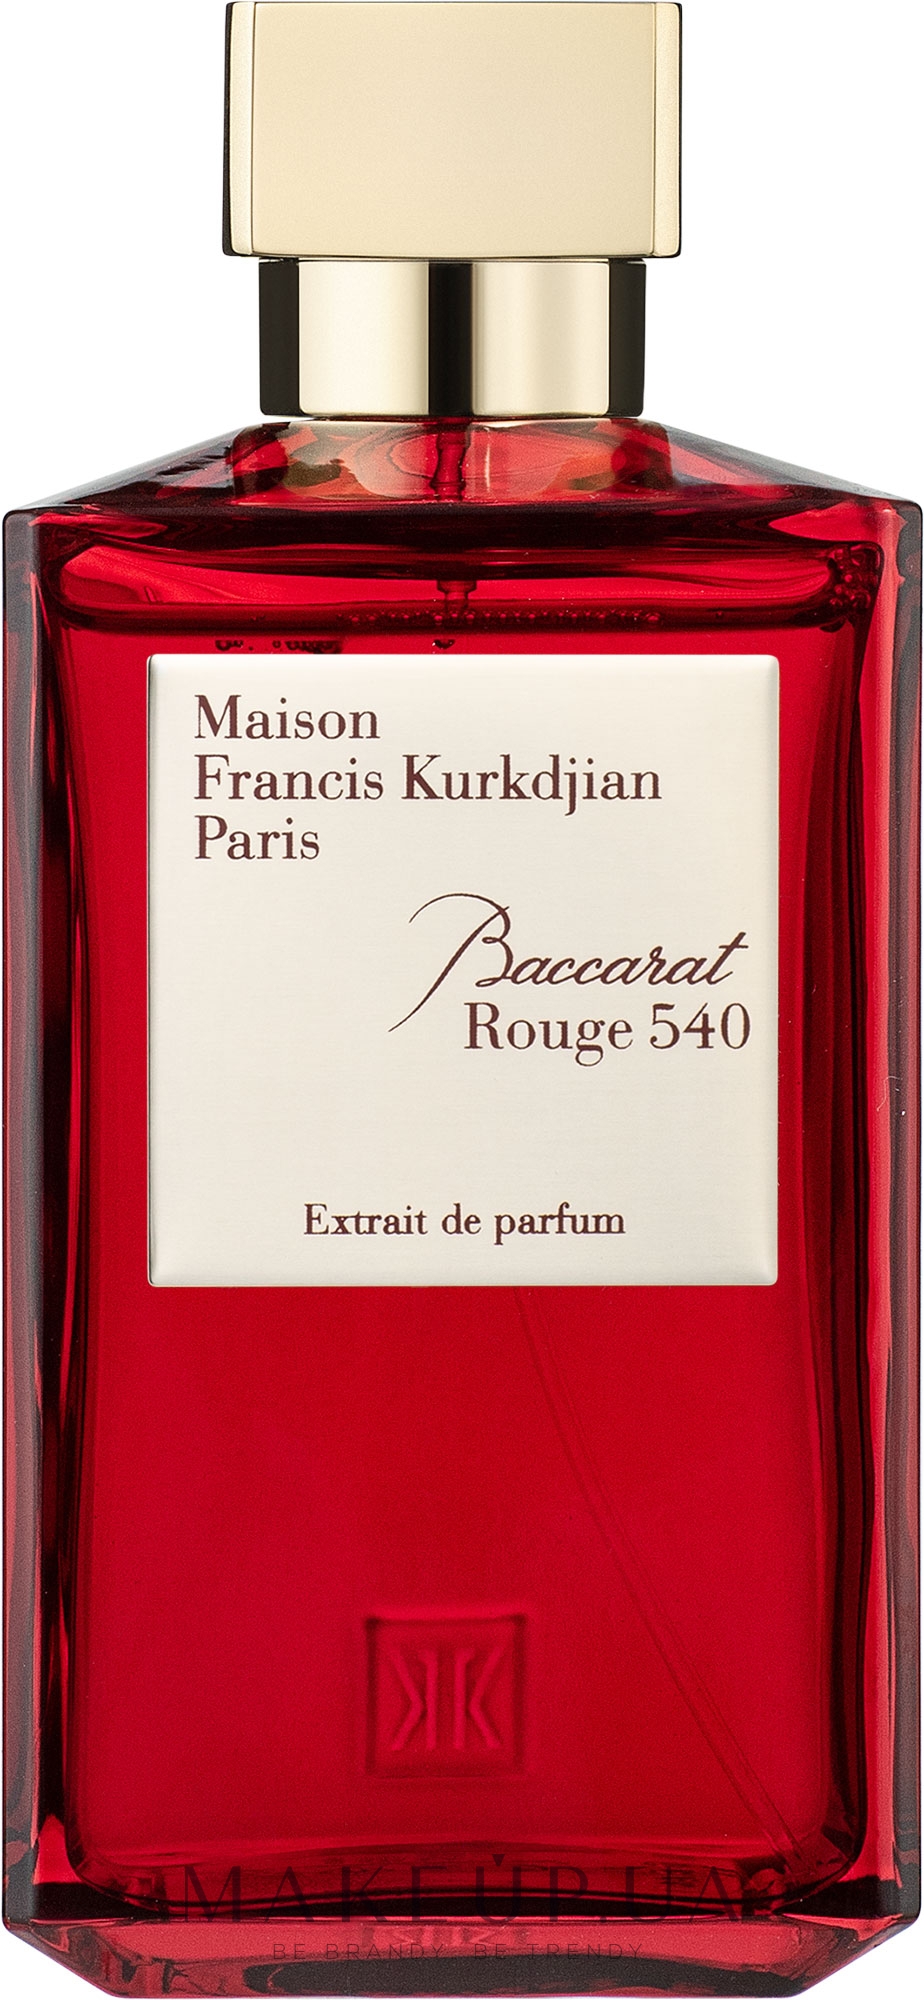 Baccarat rouge 540 price